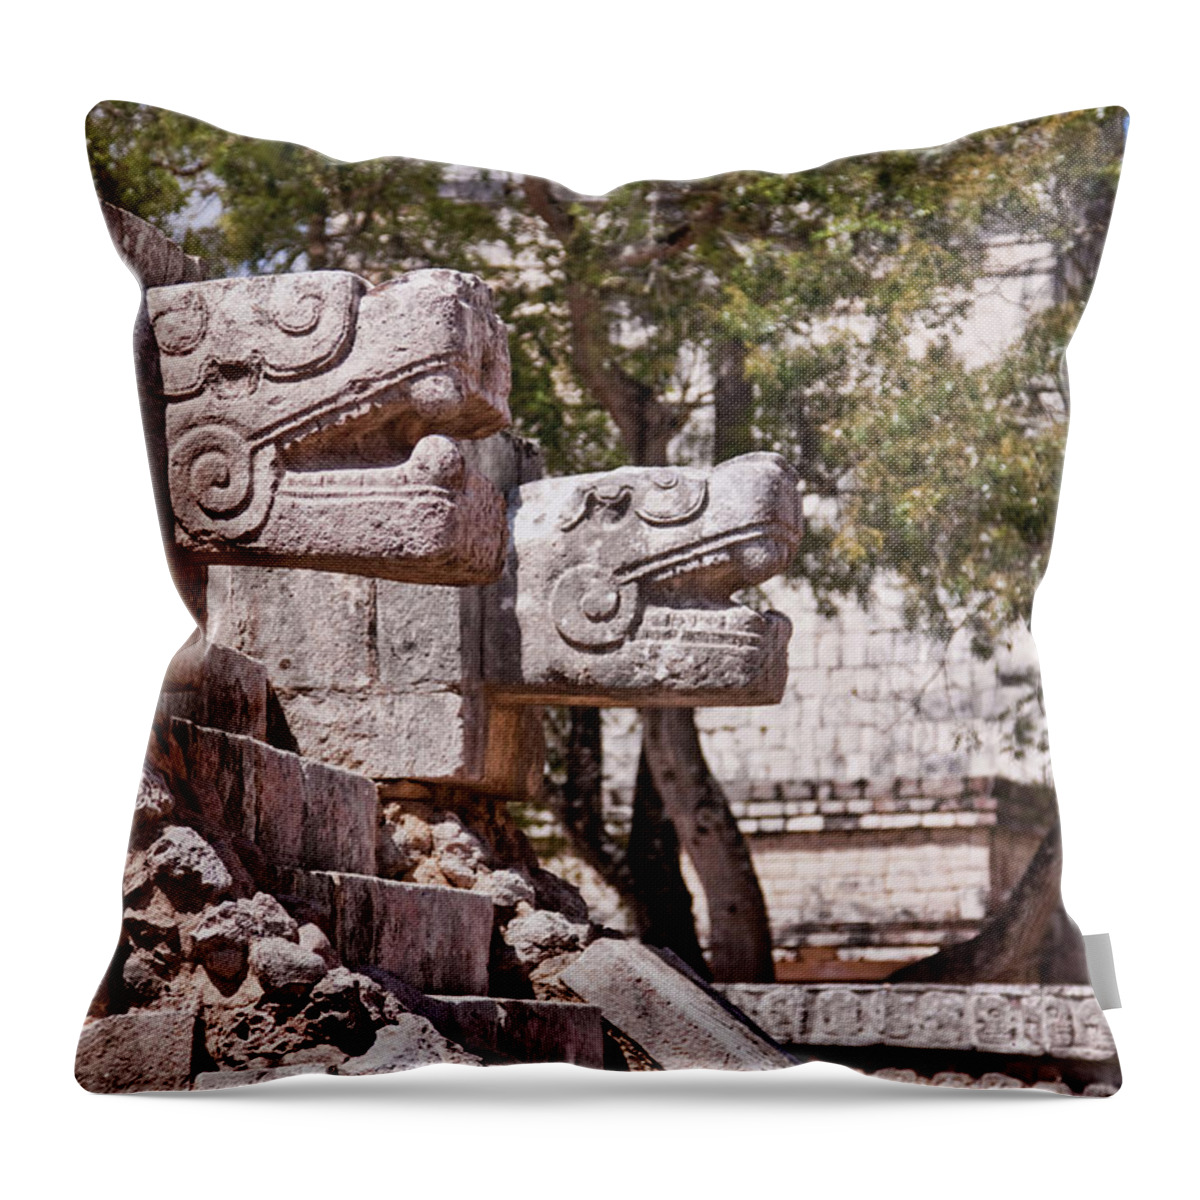 Chichen-itza Throw Pillow featuring the photograph Chichen Itza Jaguars by Tatiana Travelways